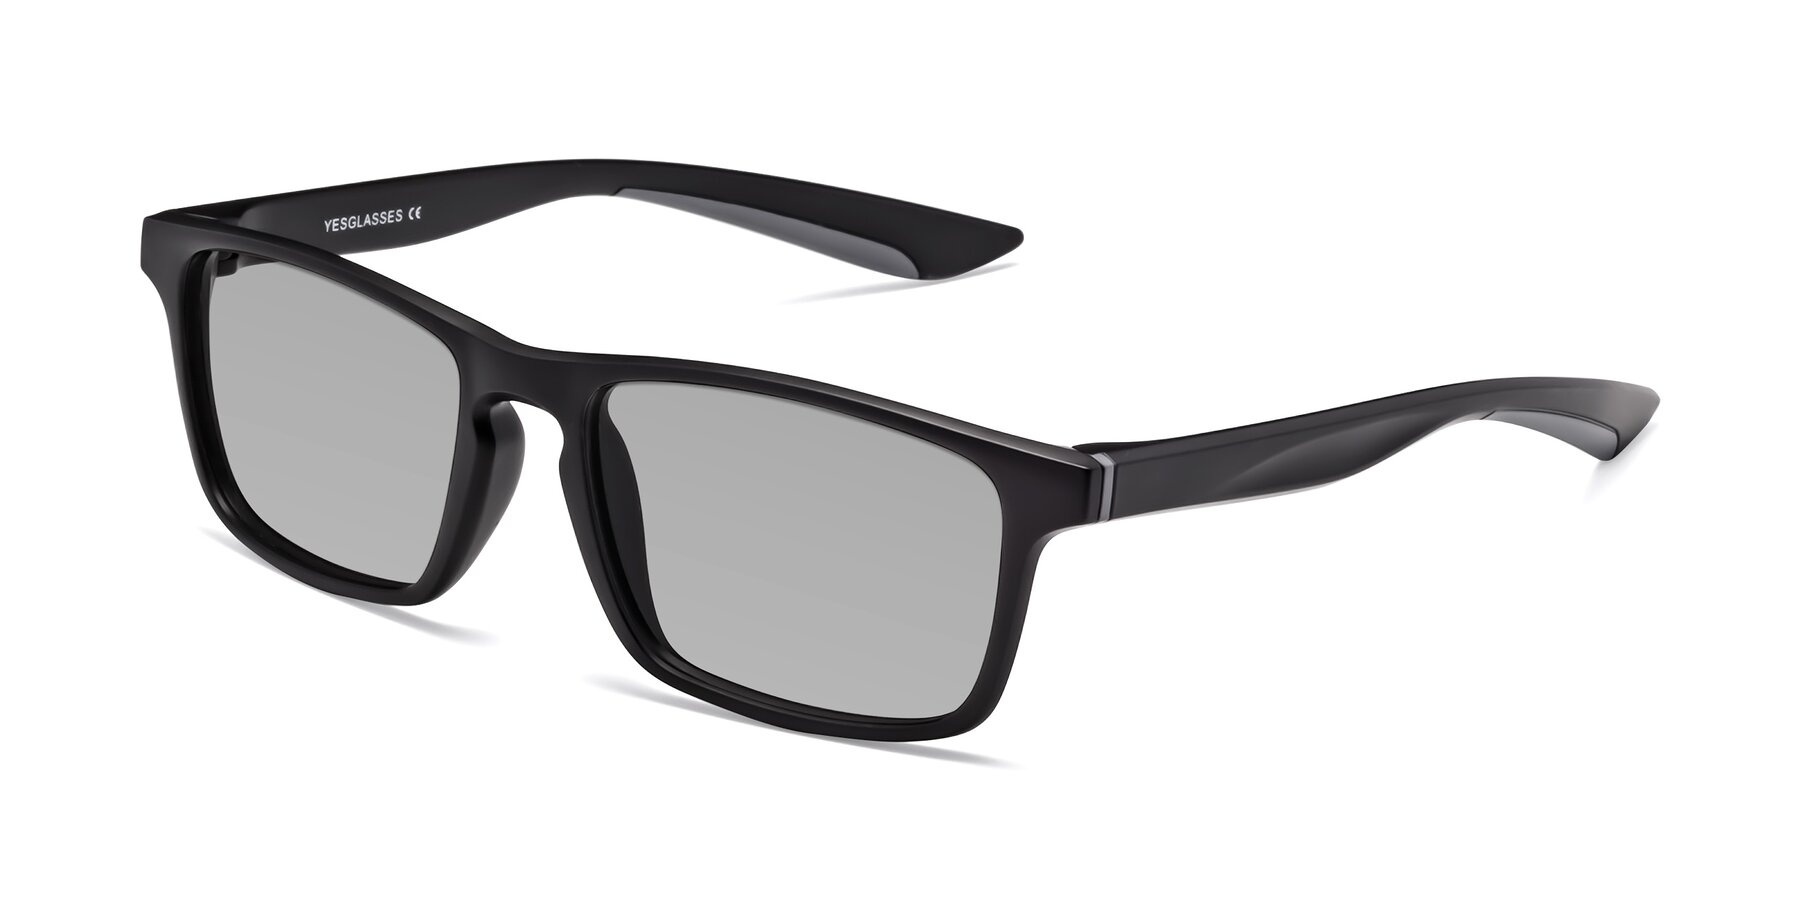 Angle of Passion in Matte Black-Gray with Light Gray Tinted Lenses